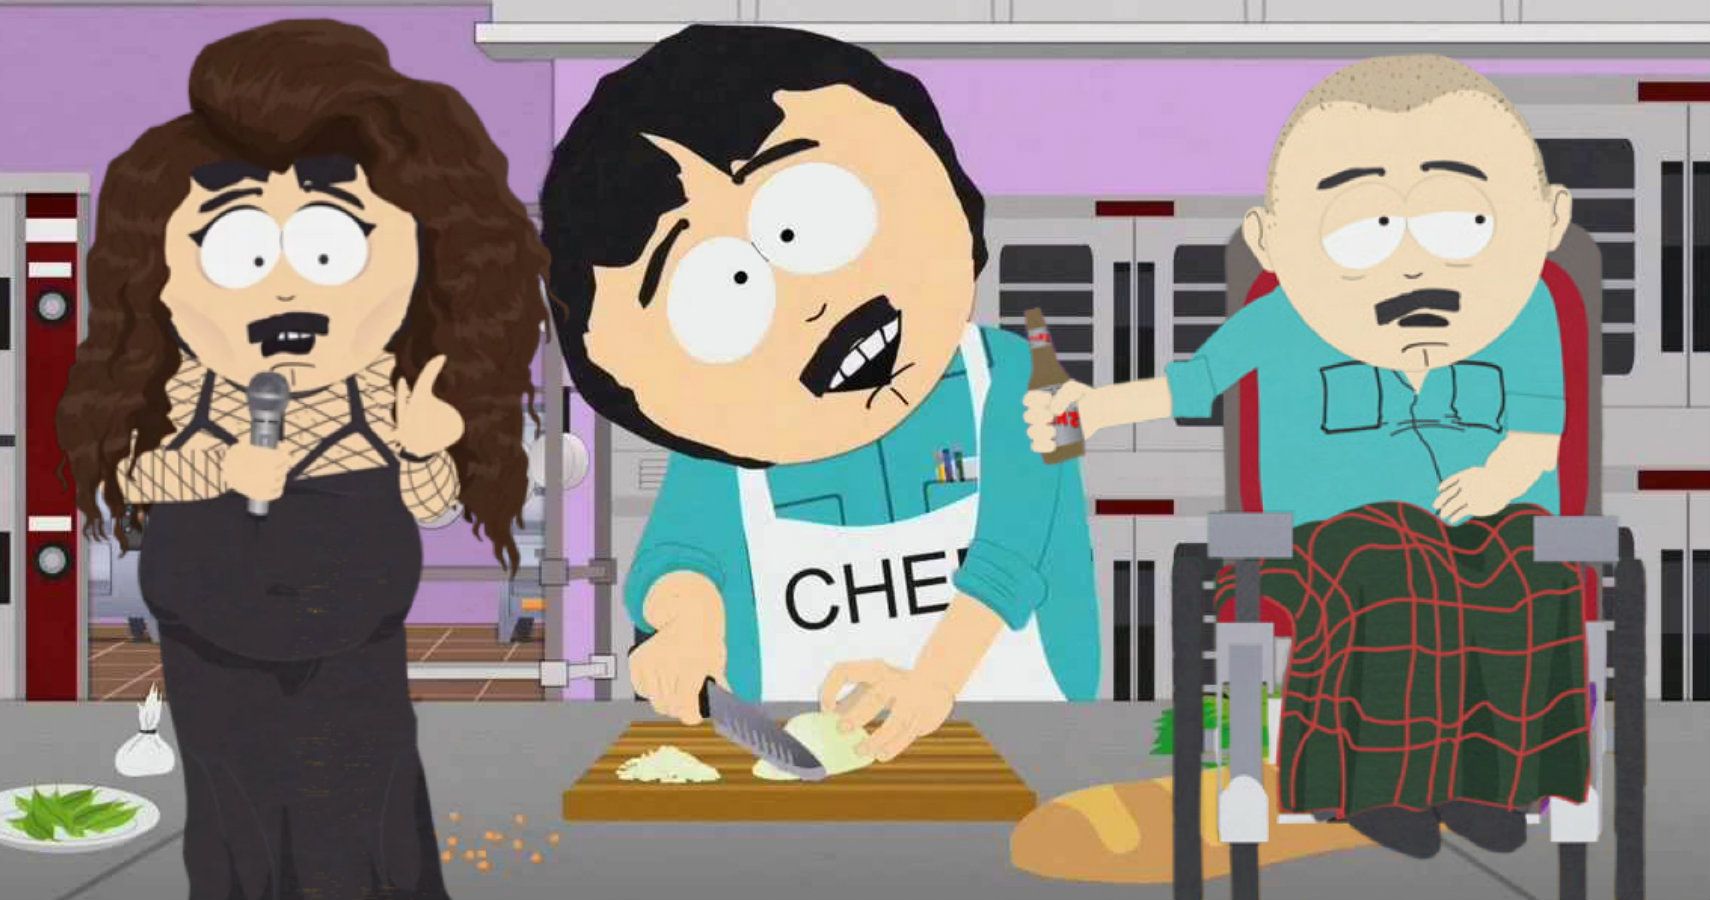 Randy Marsh voiced by Trey Parker is always up to no good. 